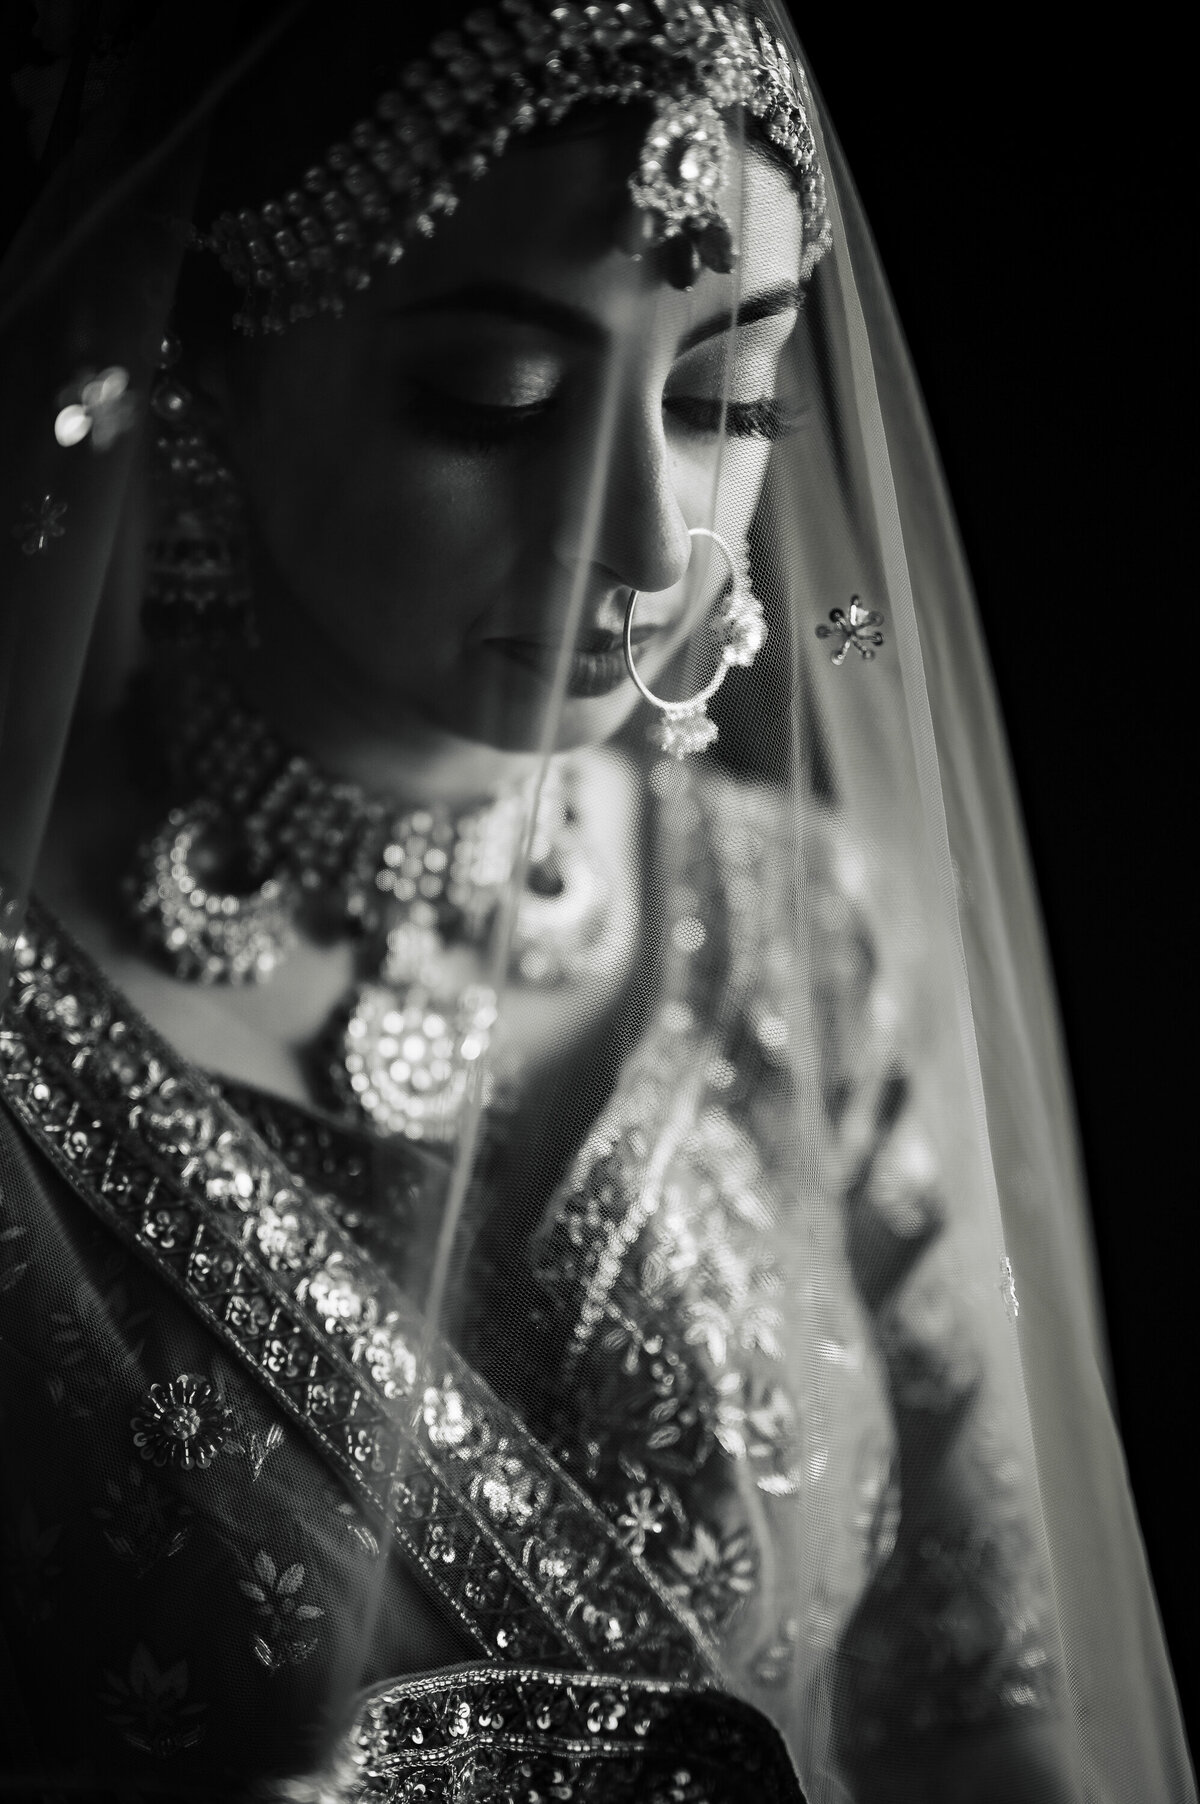 Ishan Fotografi is a highly-rated wedding photography studio in Hamburg, NJ, specializing in Indian weddings.